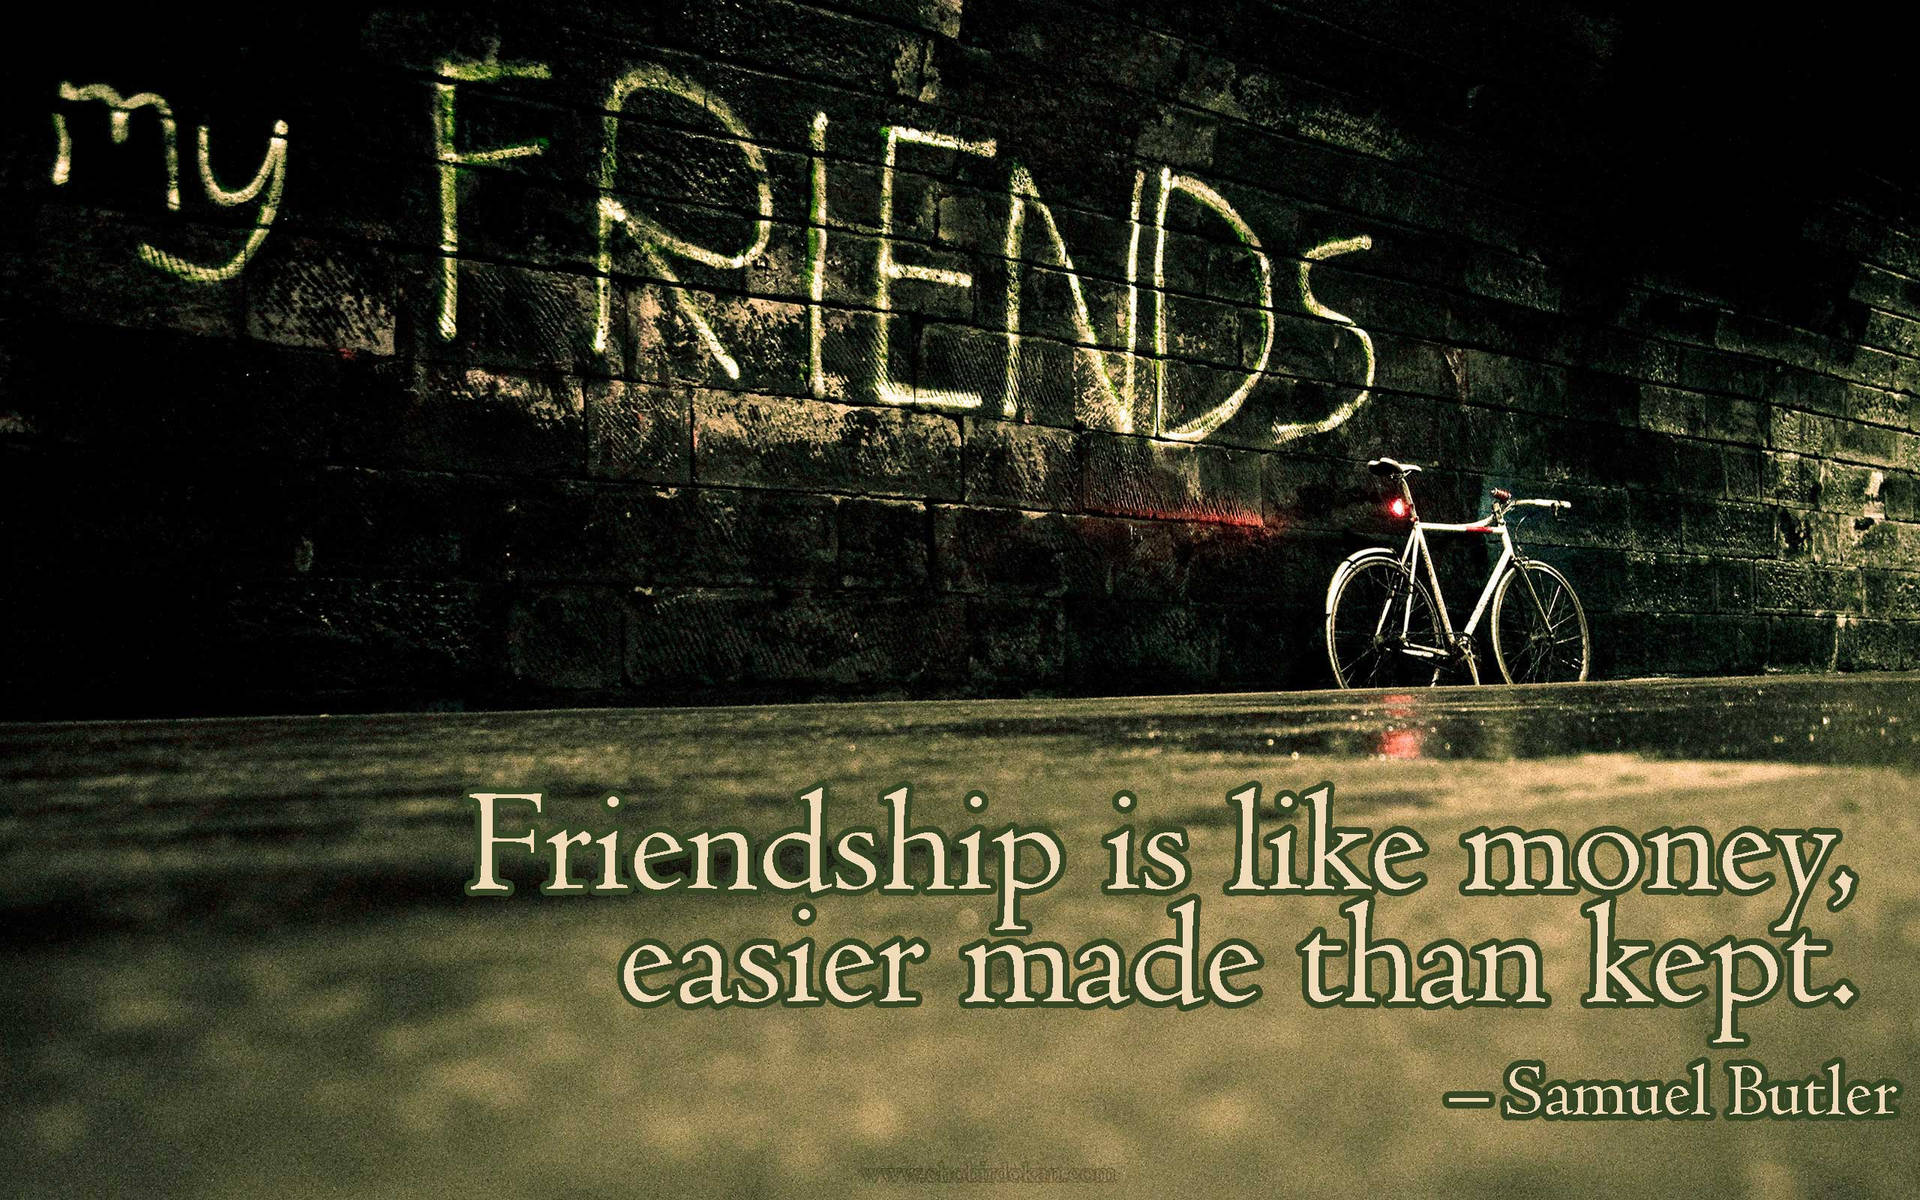 40 Cute Friendship Quotes With Images  Friendship wallpapers Chobirdokan